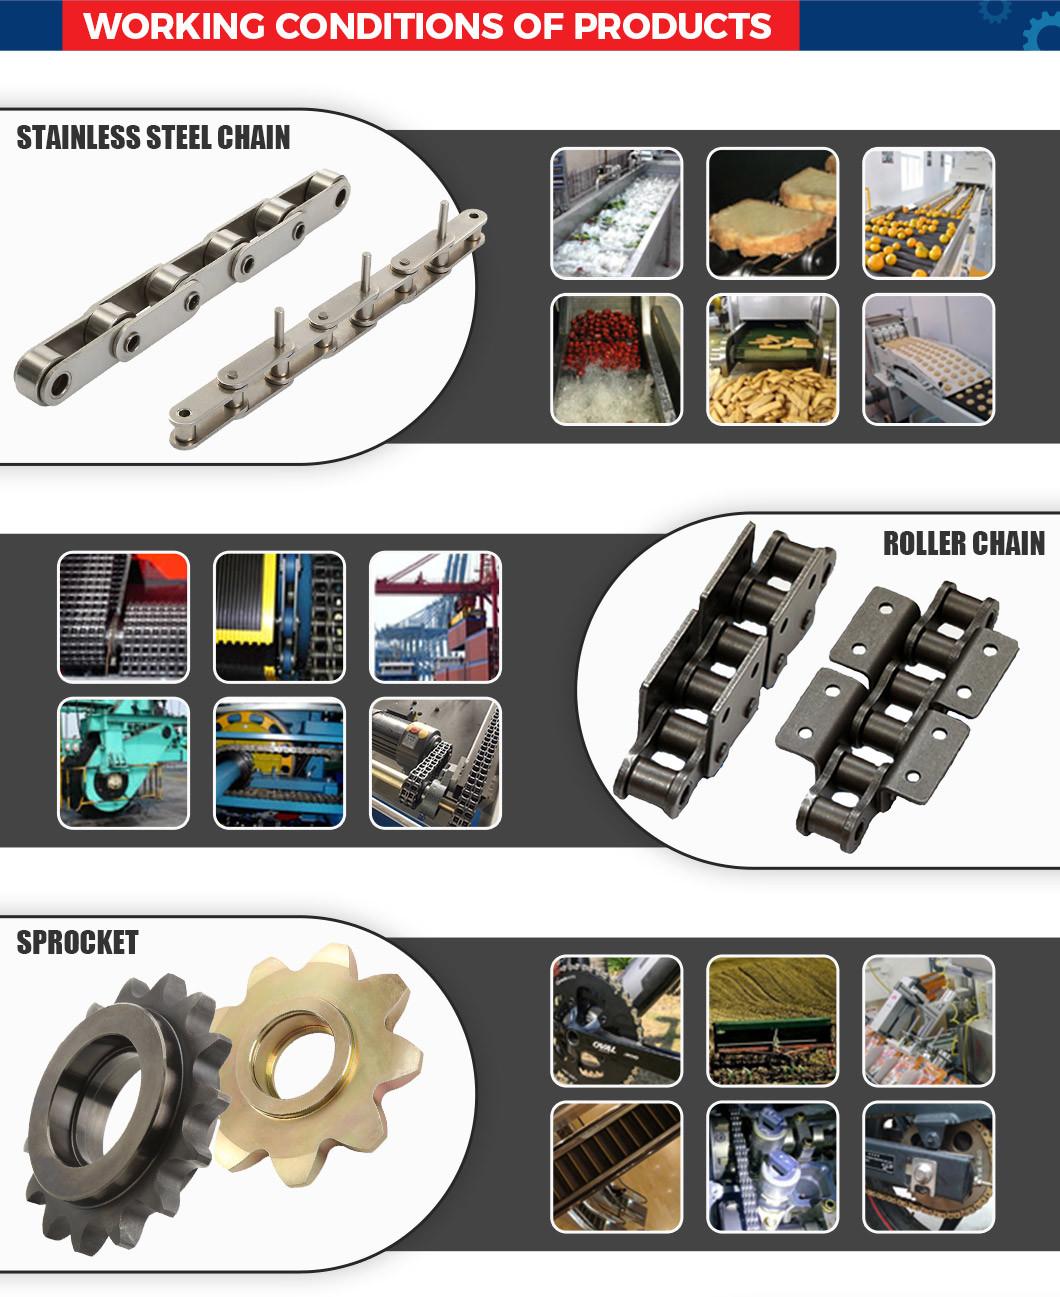 Drop Forged Rivetless Detachable Conveyor Chain From China Factory for Conveyor Machine